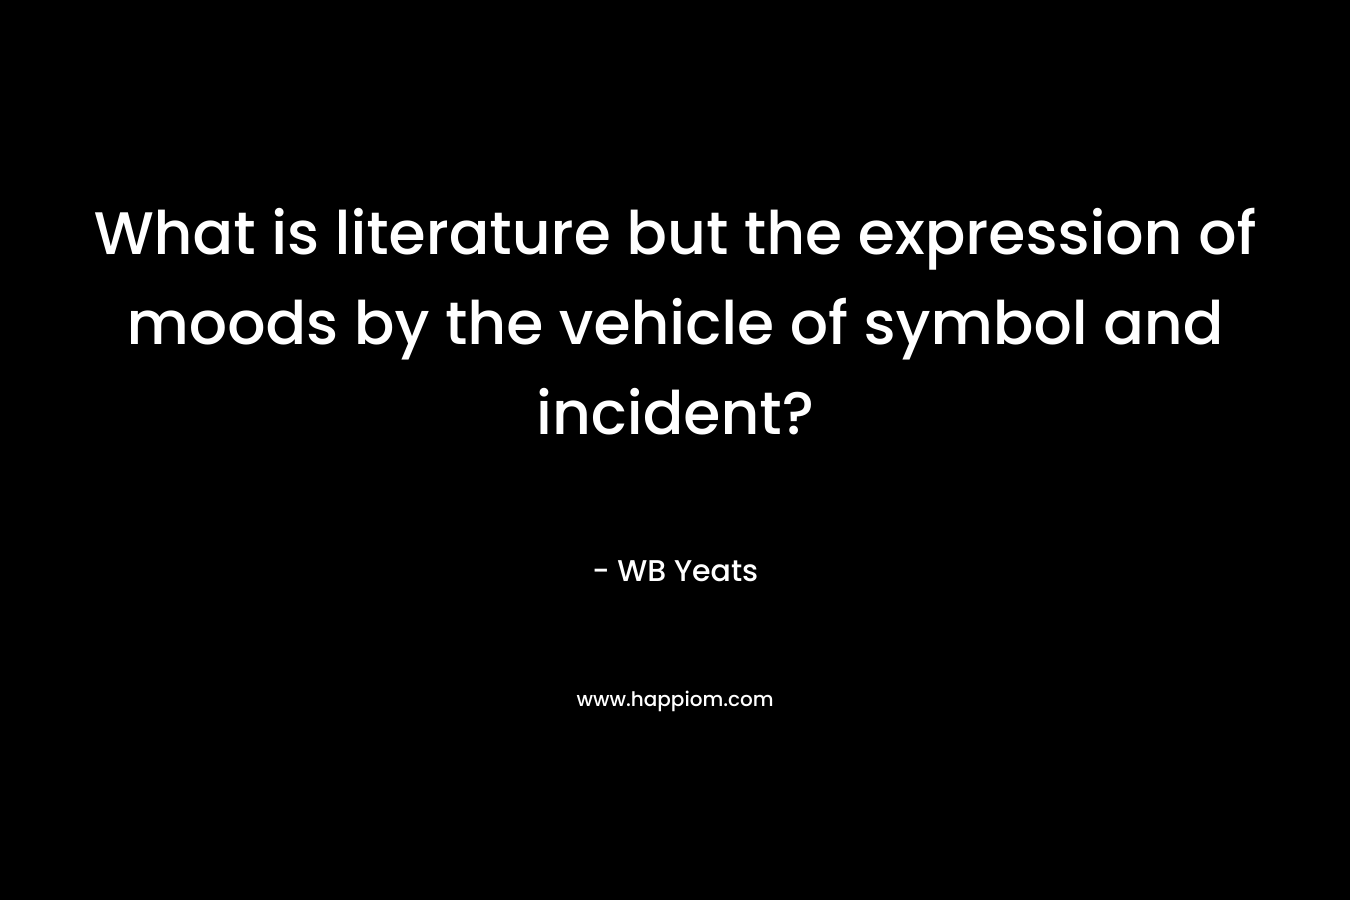 What is literature but the expression of moods by the vehicle of symbol and incident?